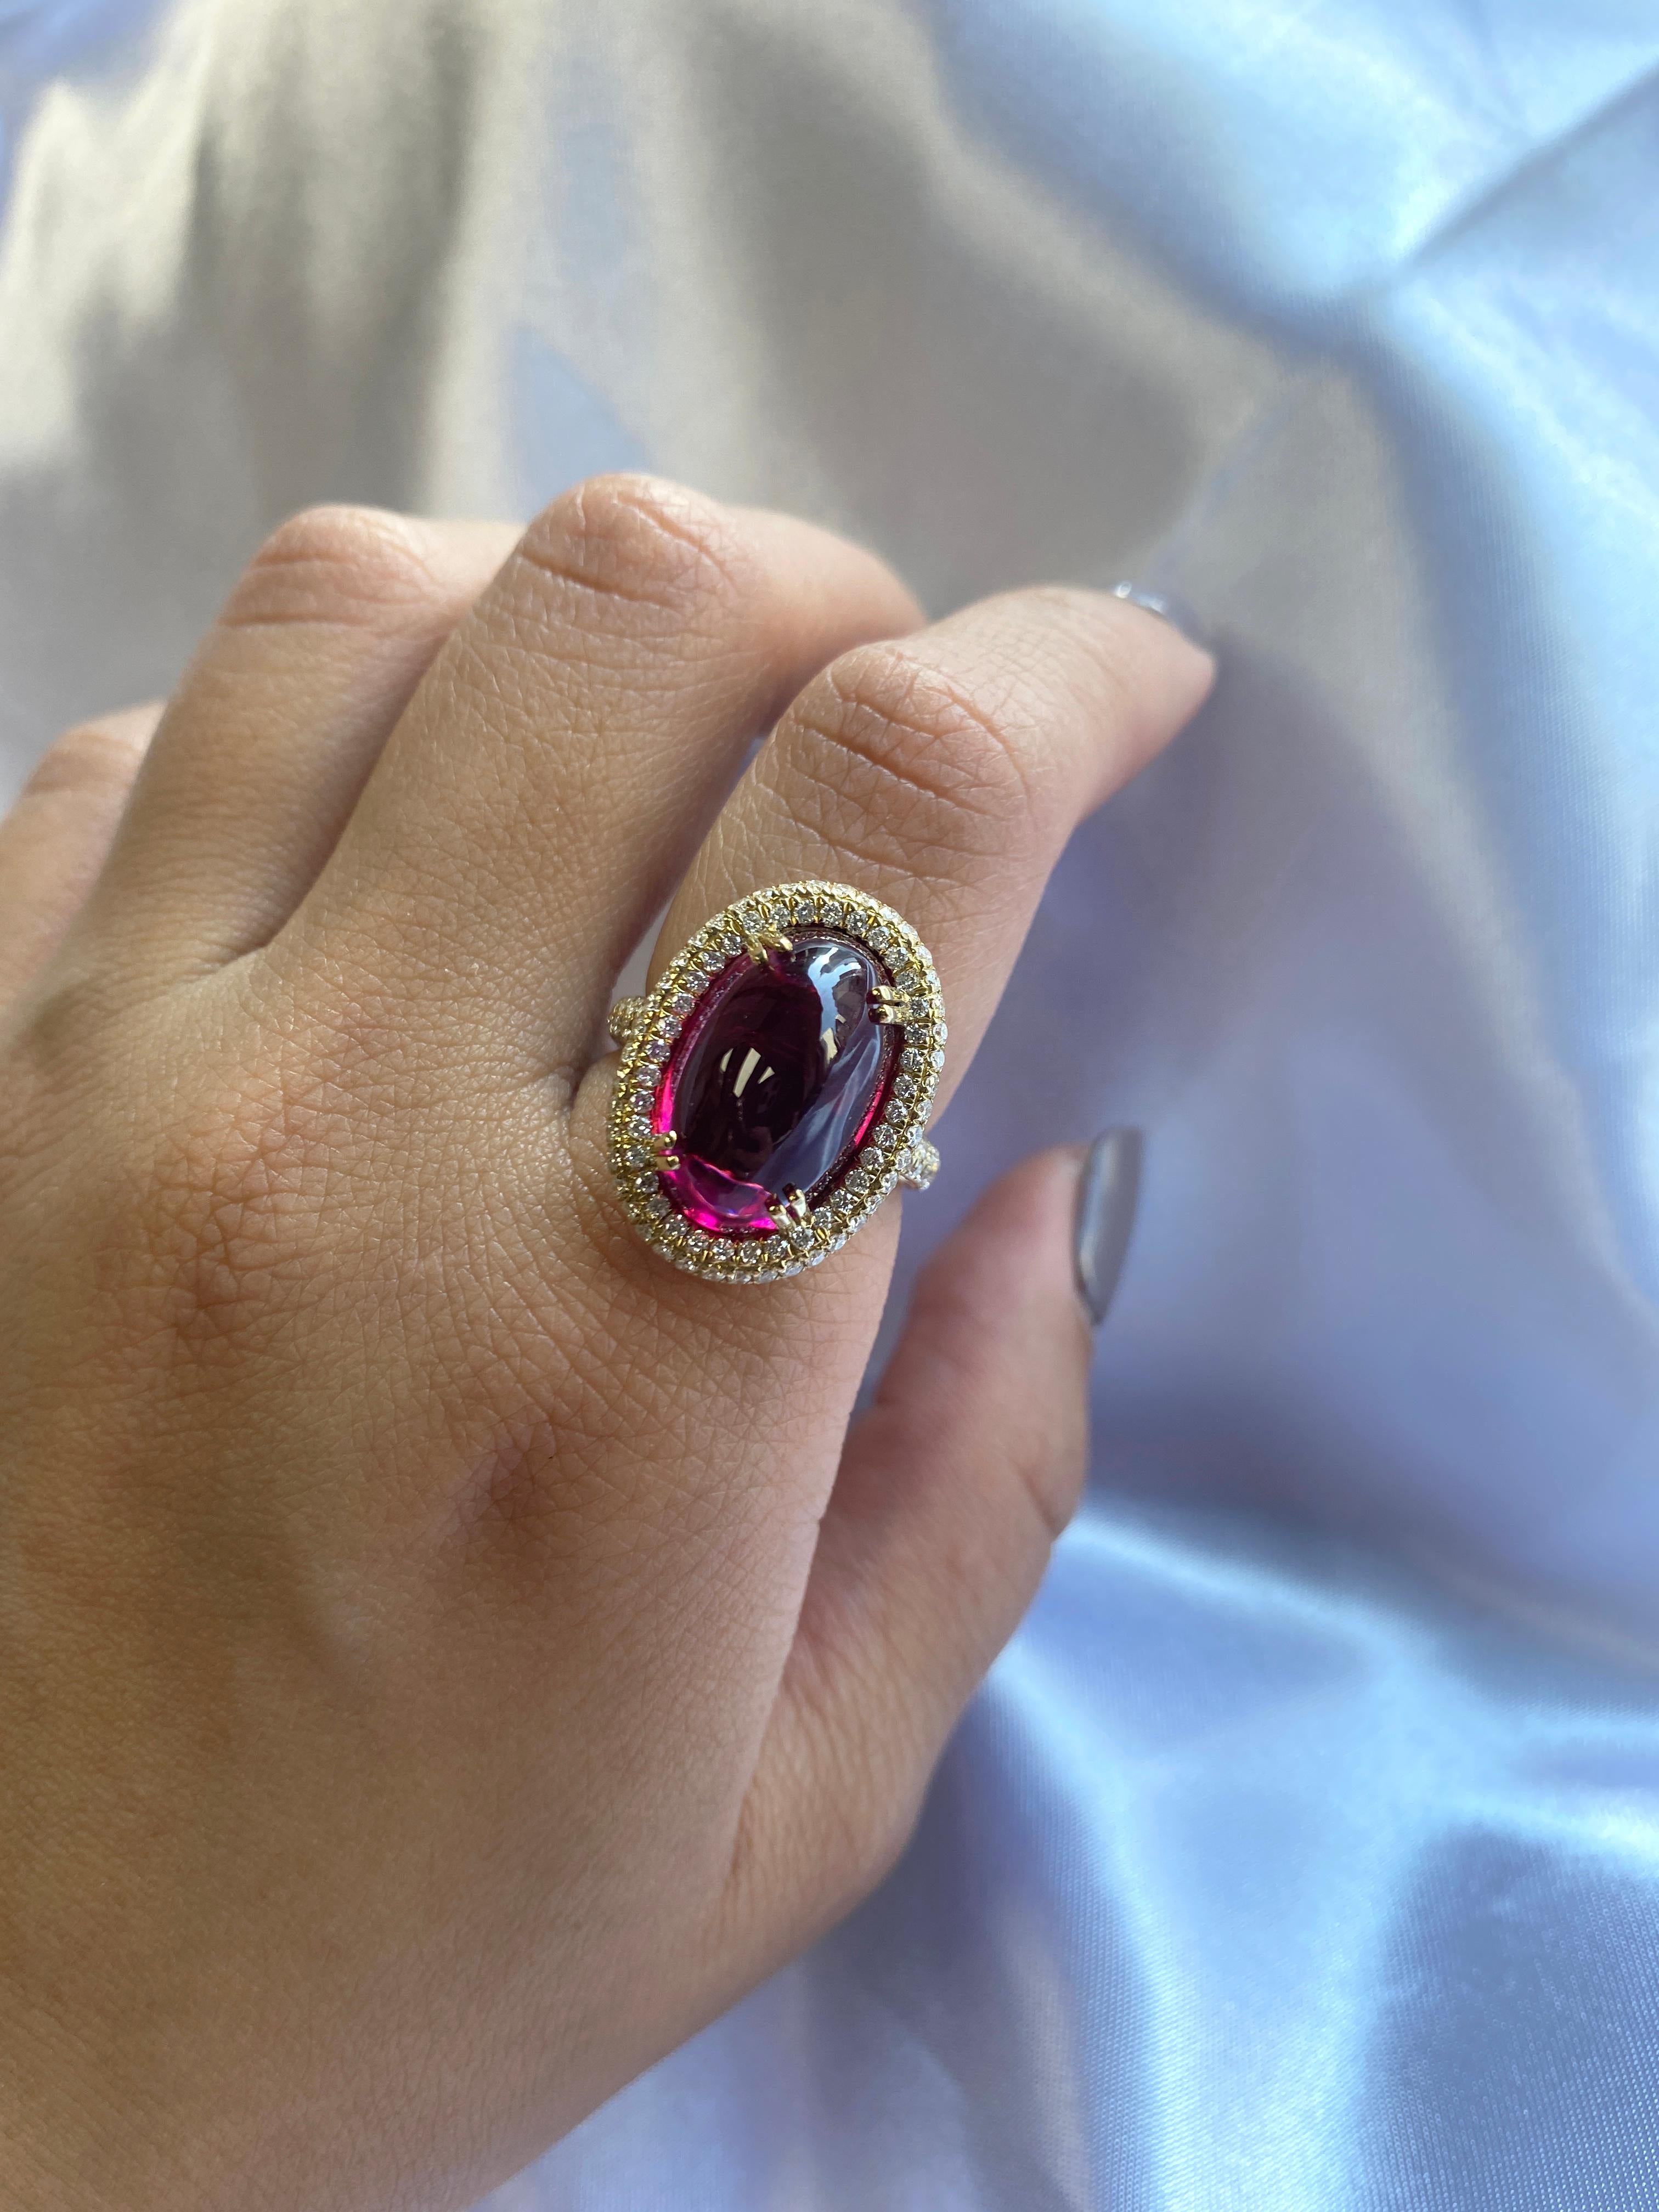 This Oval Rubelite Ring in 18K Yellow Gold from the 'G-One' Collection is an elegant piece that showcases an oval rubelite stone surrounded by diamonds. The rich hue of the rubelite is complemented by the brilliance of the diamonds, creating a